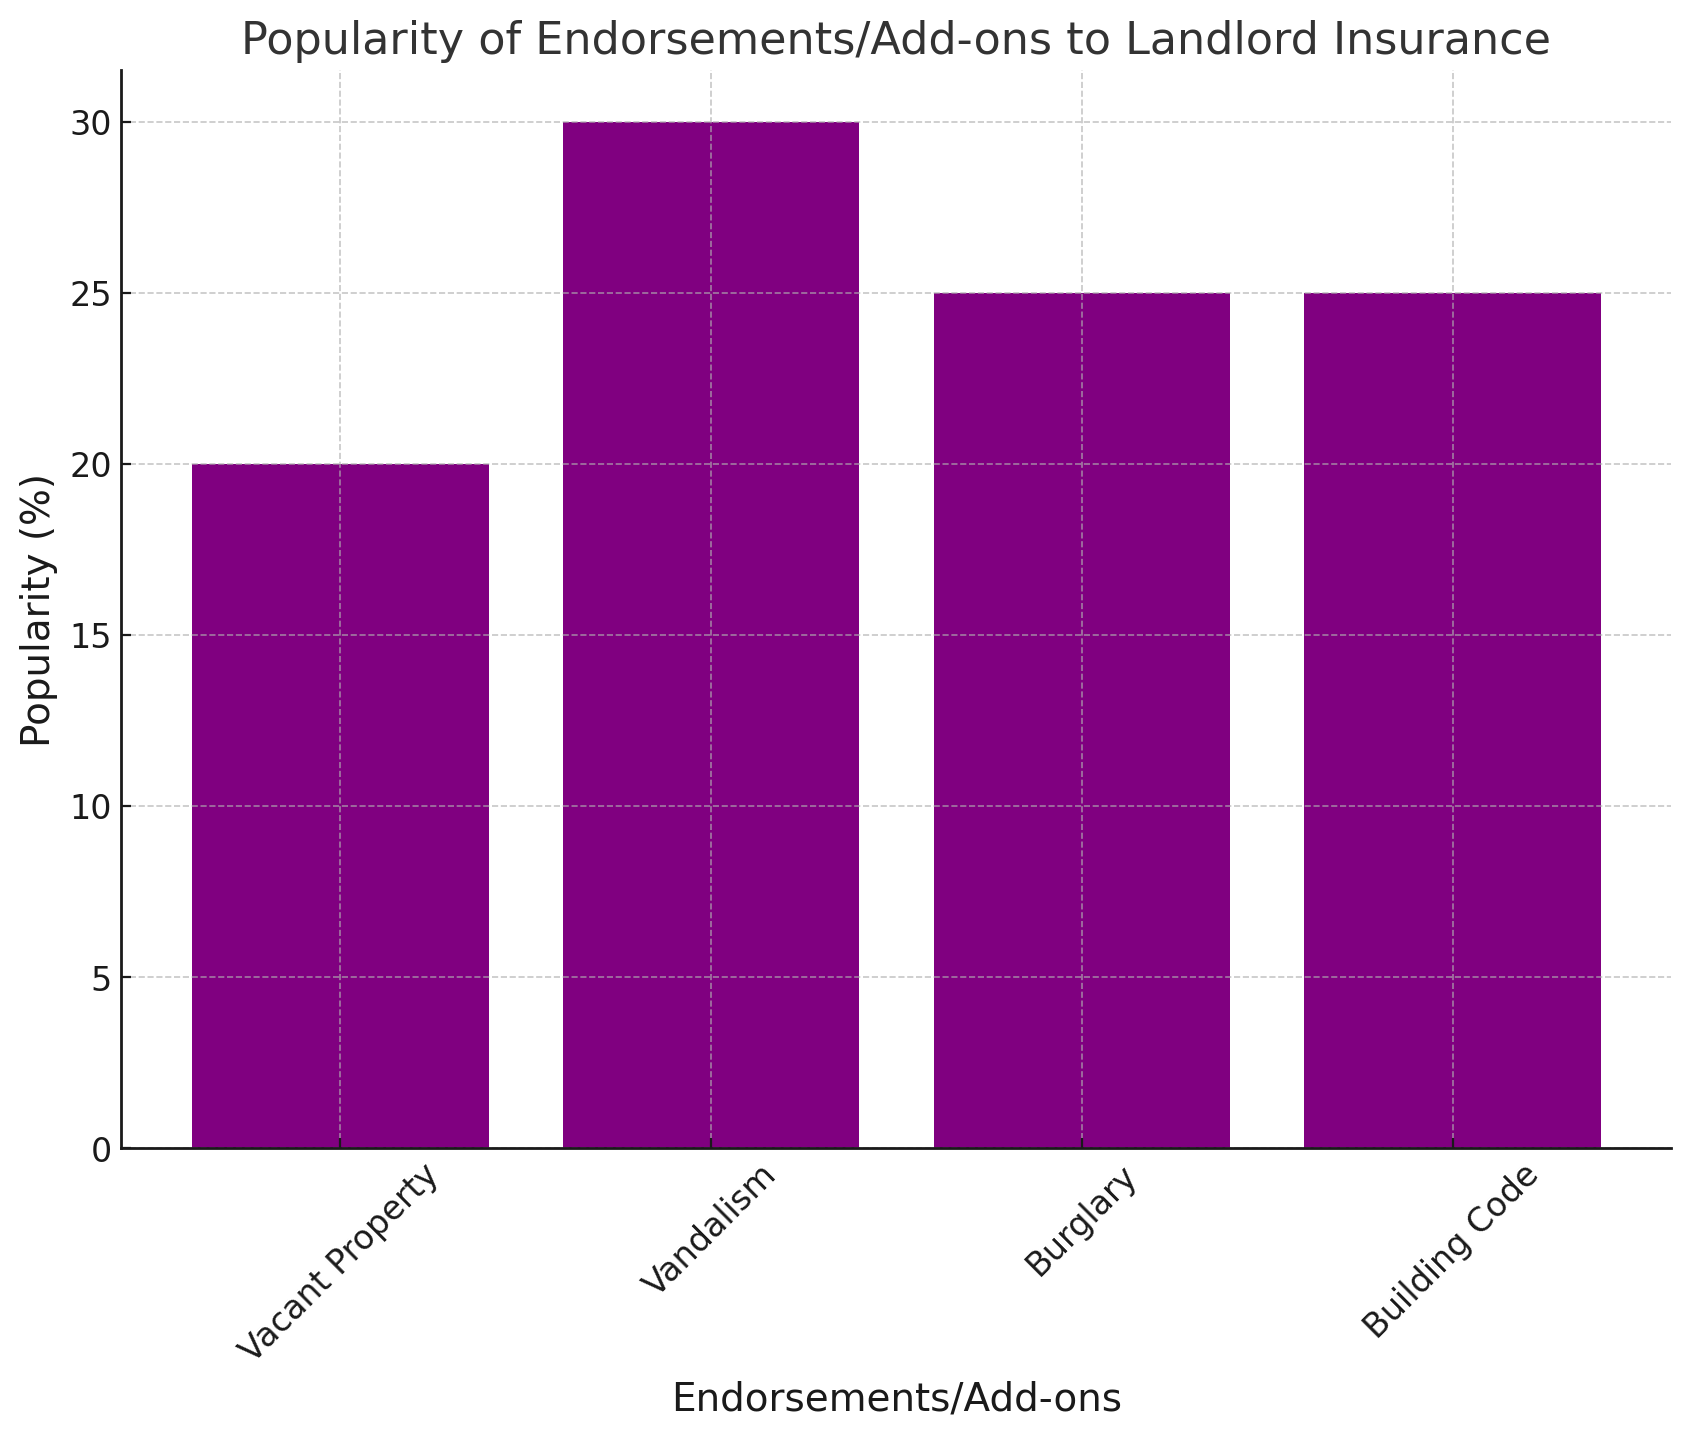 Types of Endorsements to Add to Landlord Insurance